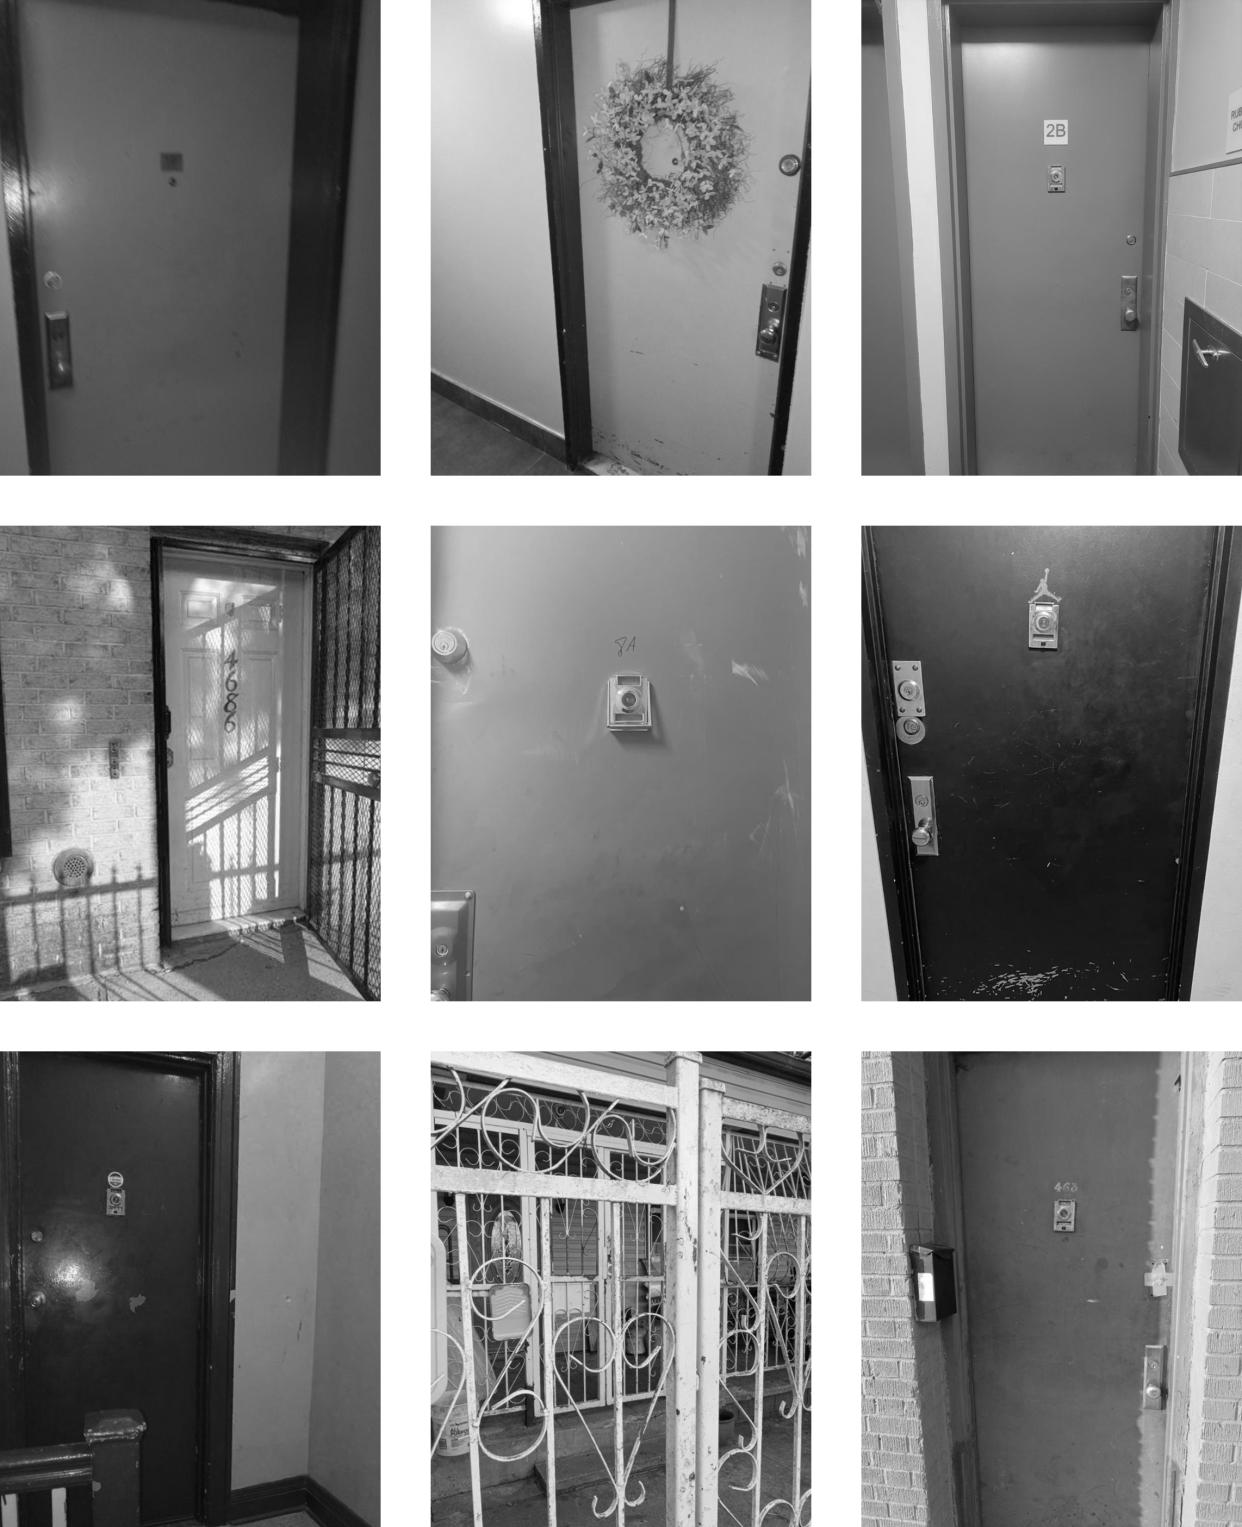 Parents in the Bronx, Harlem and the Lower East Side who are members of the community organization JMac for Families, which advocates to overhaul the child welfare system, took photos of the doors that ACS workers had knocked on and shared them with ProPublica and NBC News.
